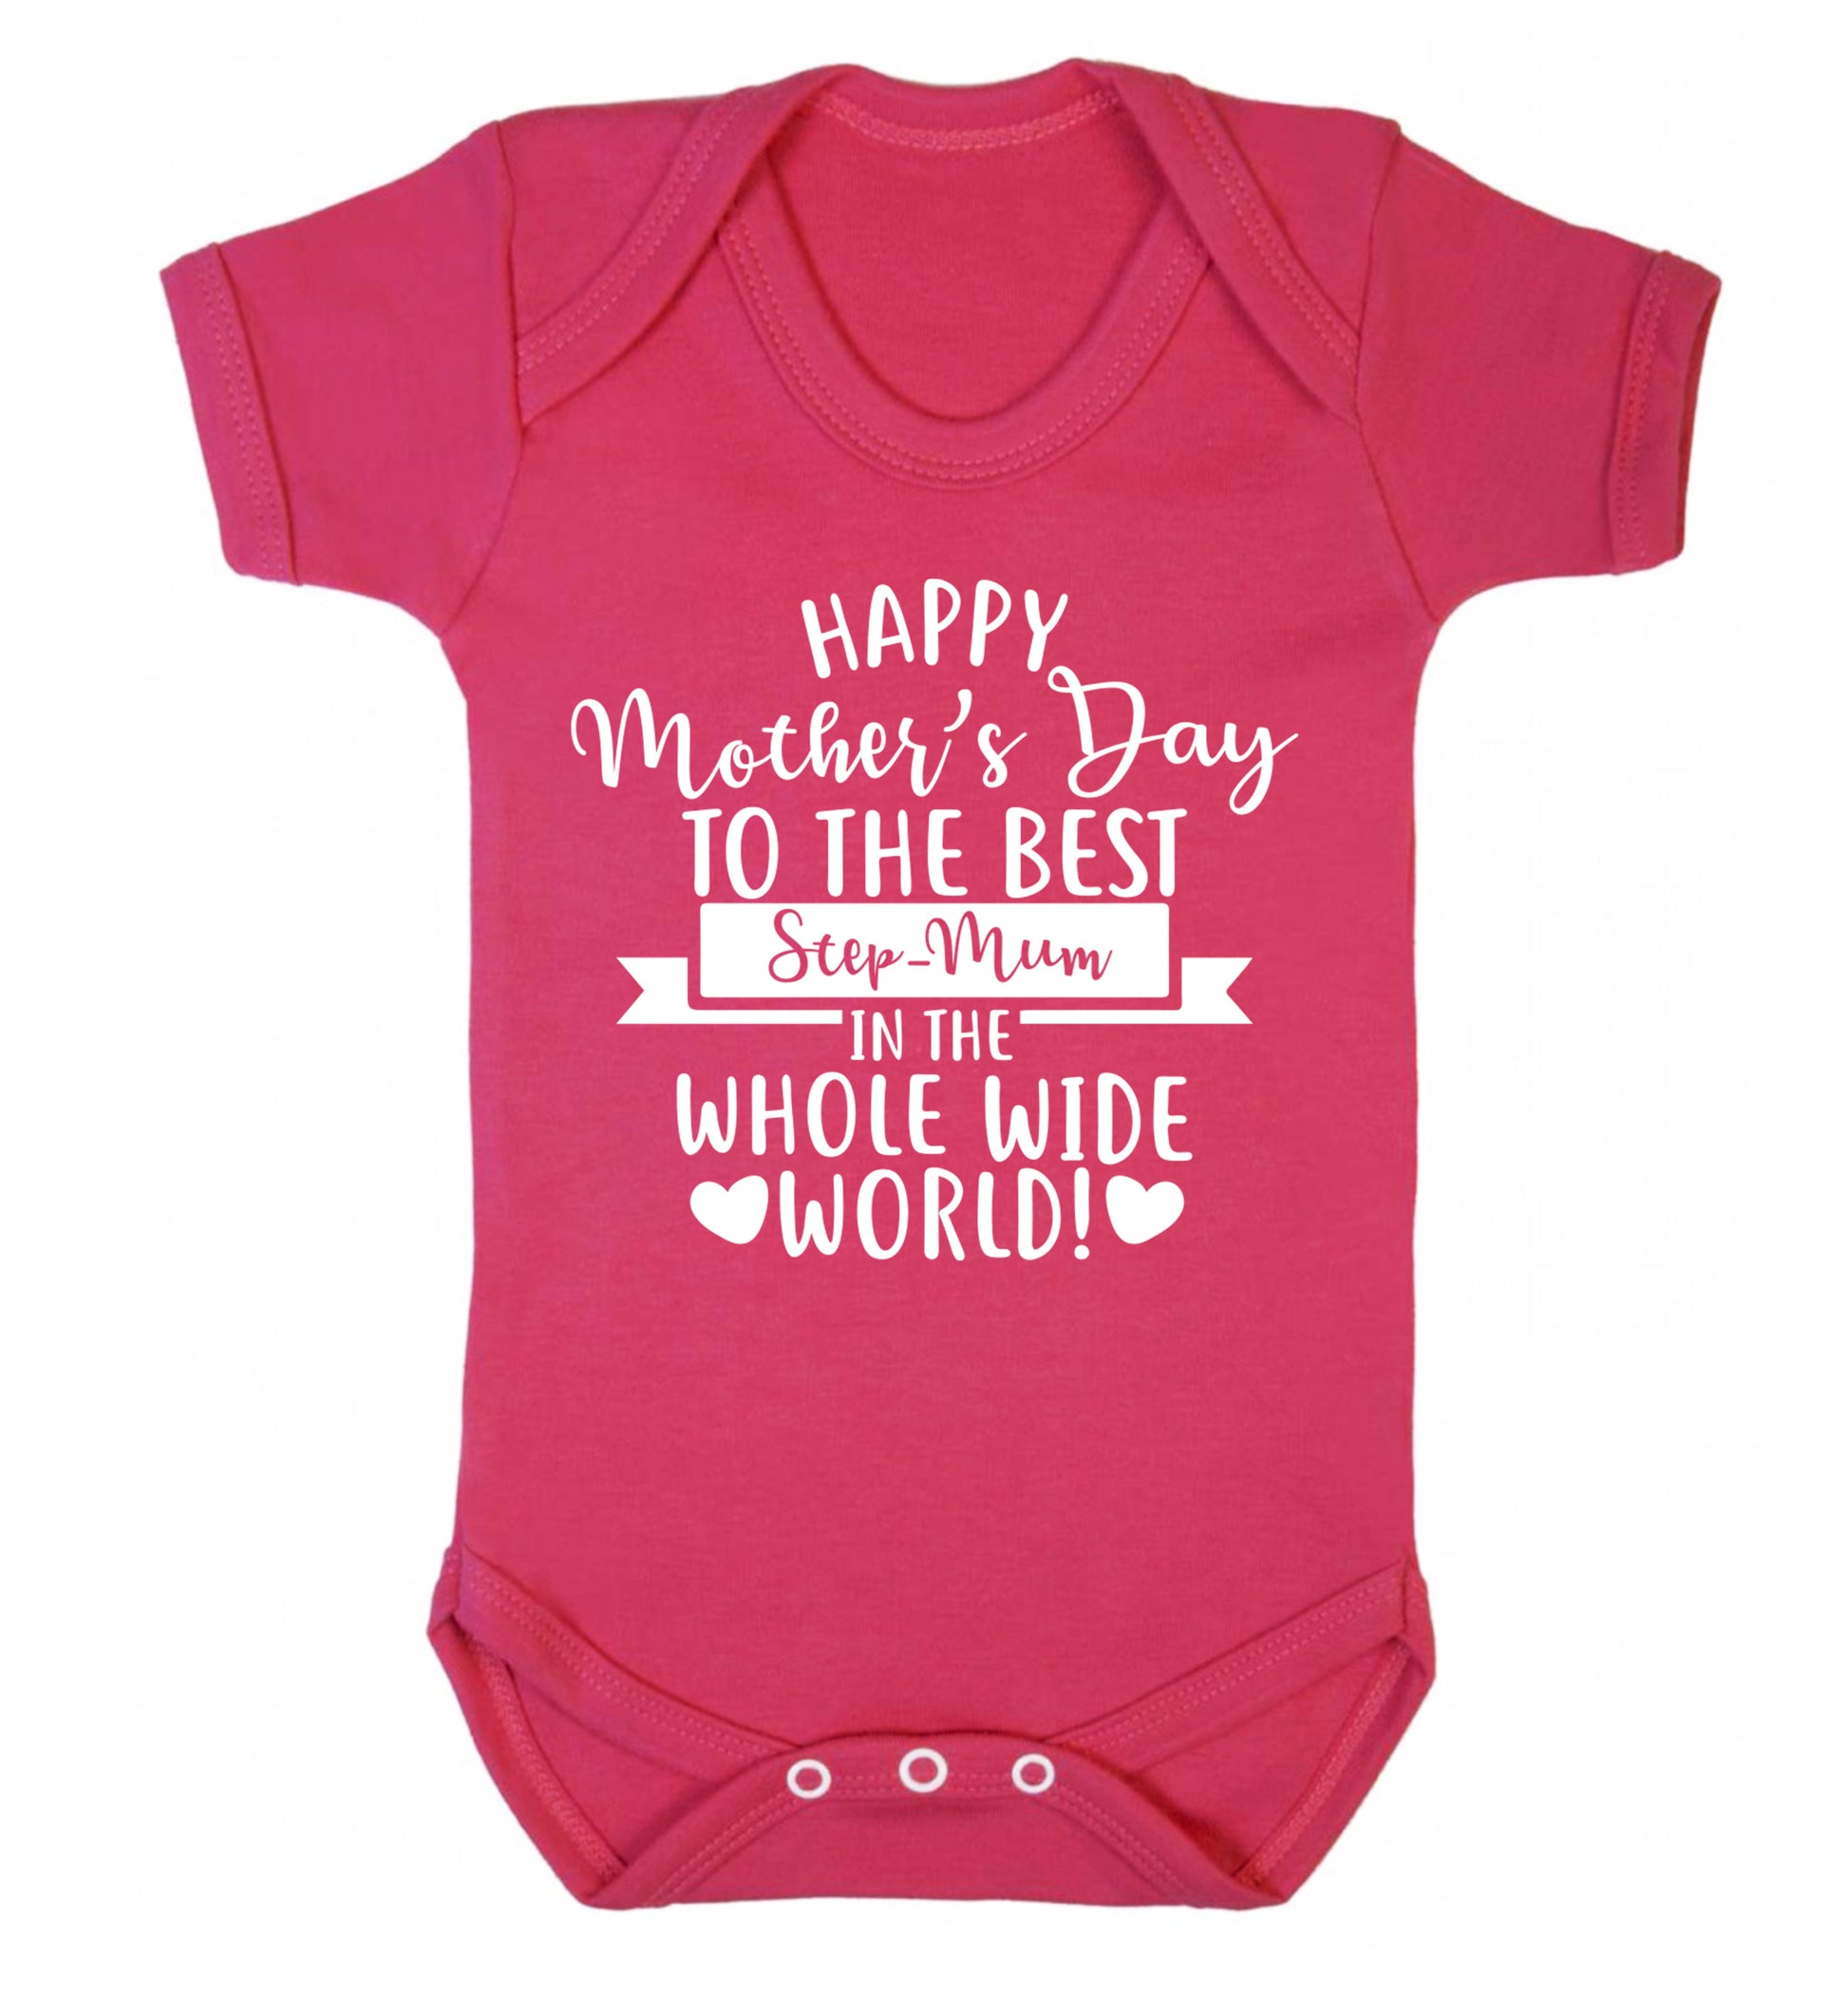 Happy mother's day to the best step-mum in the world Baby Vest dark pink 18-24 months